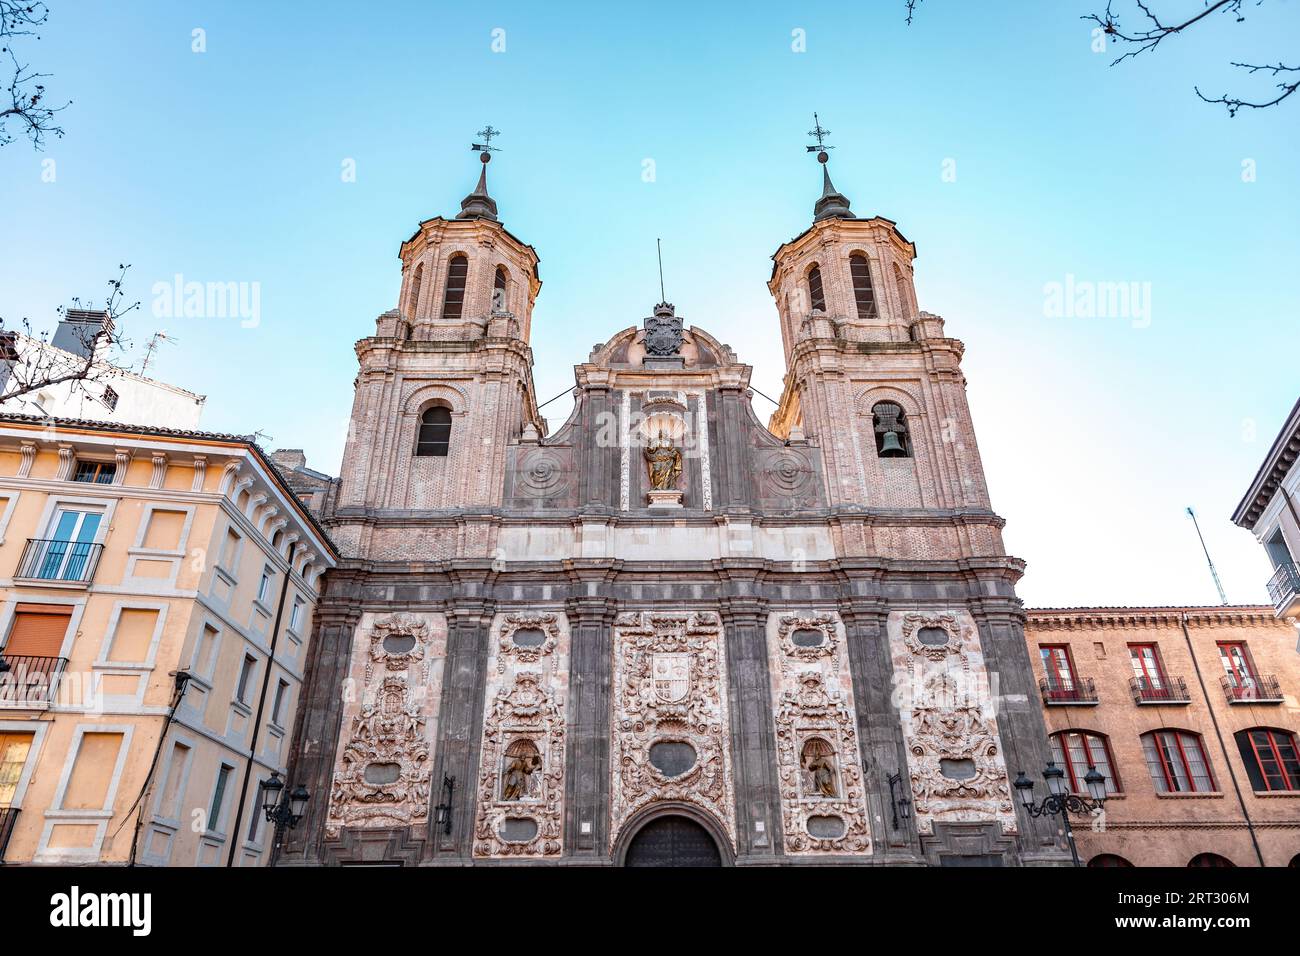 The Church of Santa Isabel de Portugal, or San Cayetano, is a baroque style Catholic church, located in Zaragoza, the capital of Aragon, Spain. Stock Photo